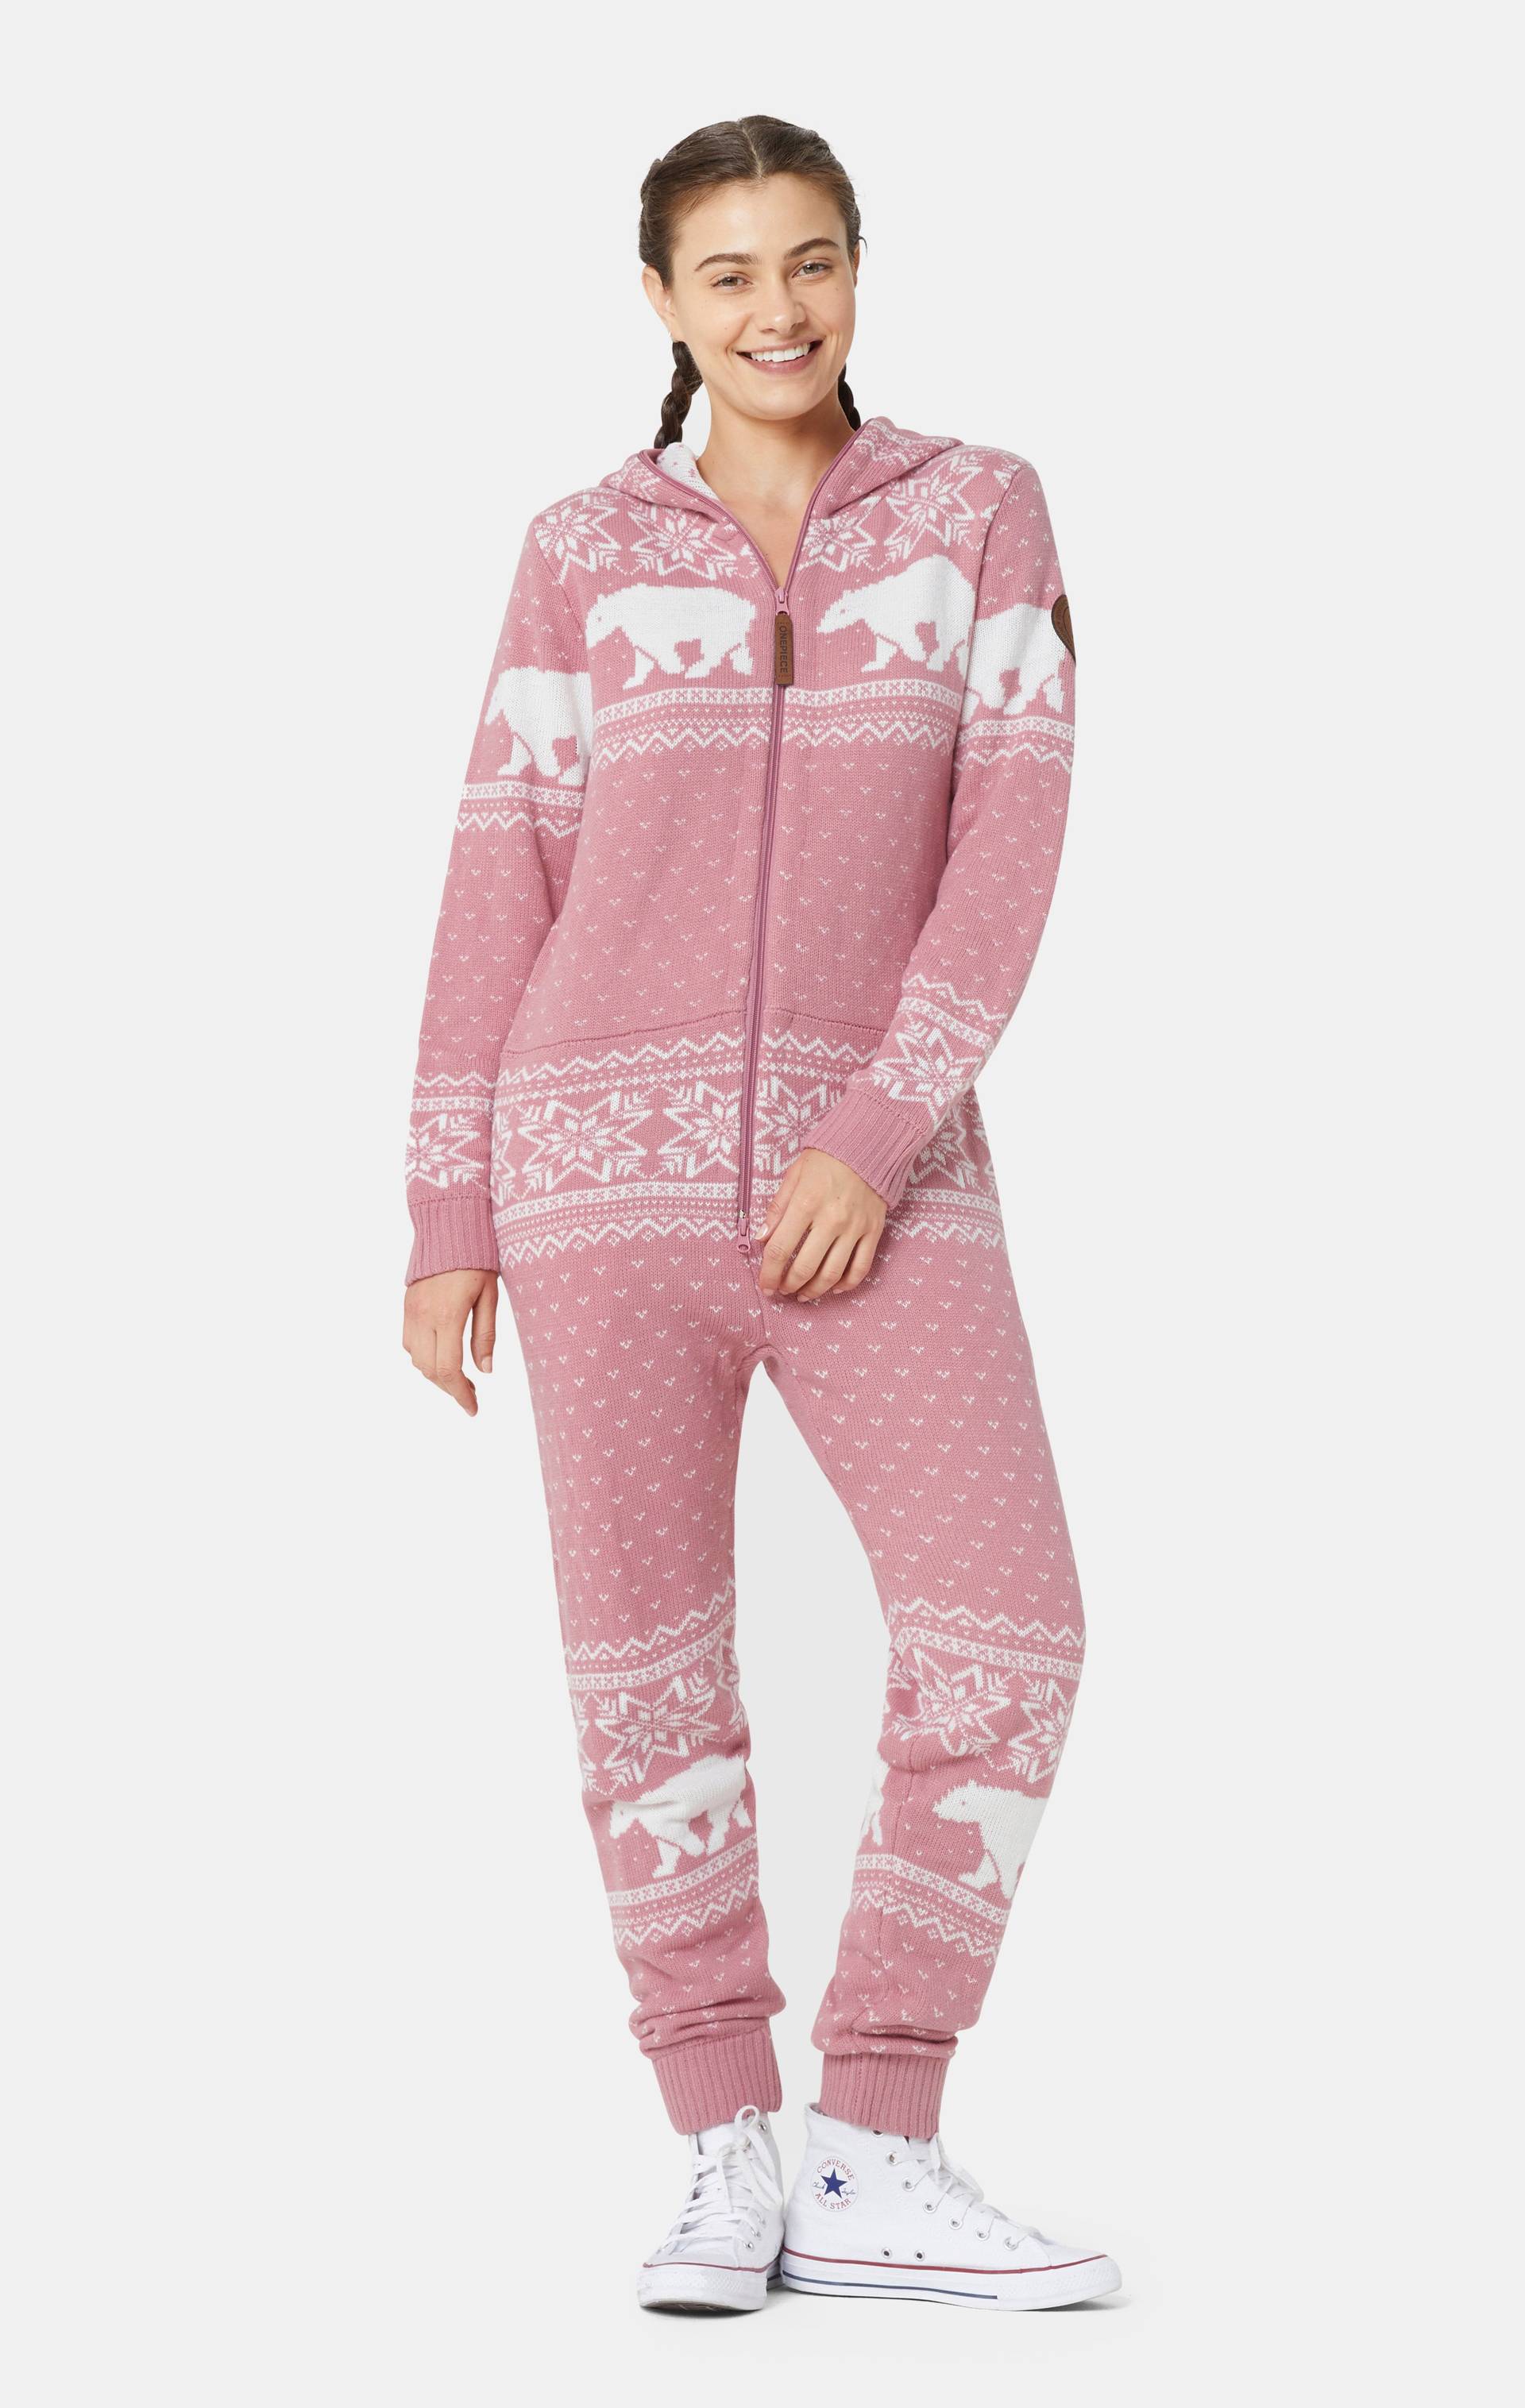 Onepiece Polar Bears Are Coming Jumpsuit Light Pink - 9